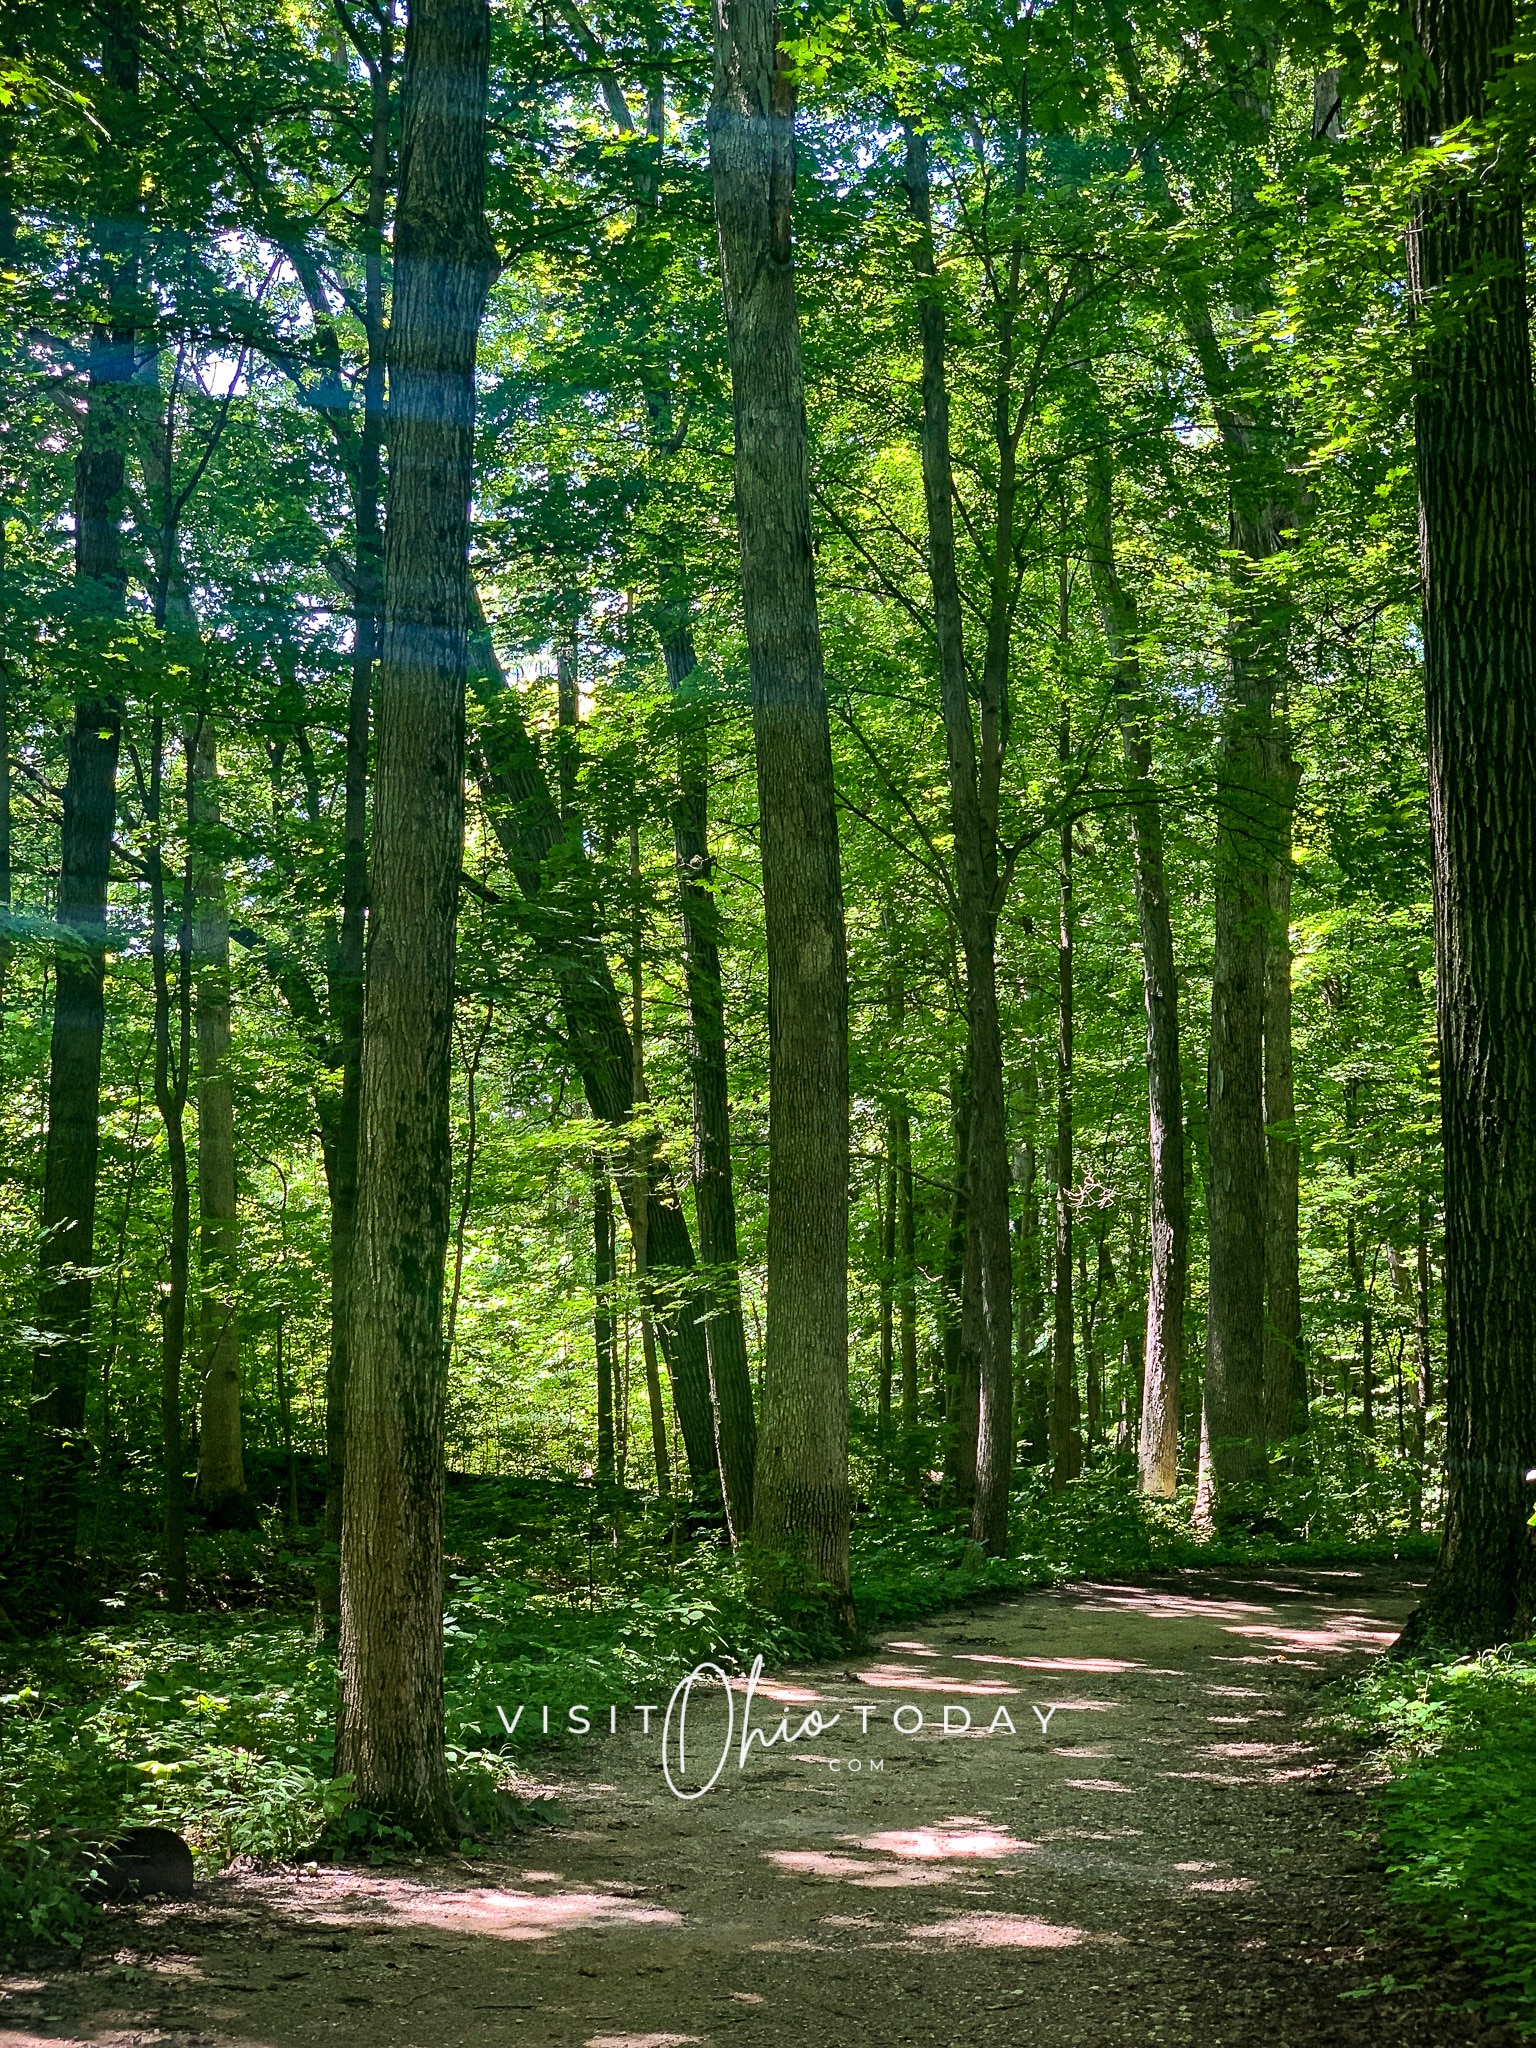 vertical photo showing a trail path through trees, with the sun creating a dappled pattern on the ground Photo credit: Cindy Gordon of VisitOhioToday.com